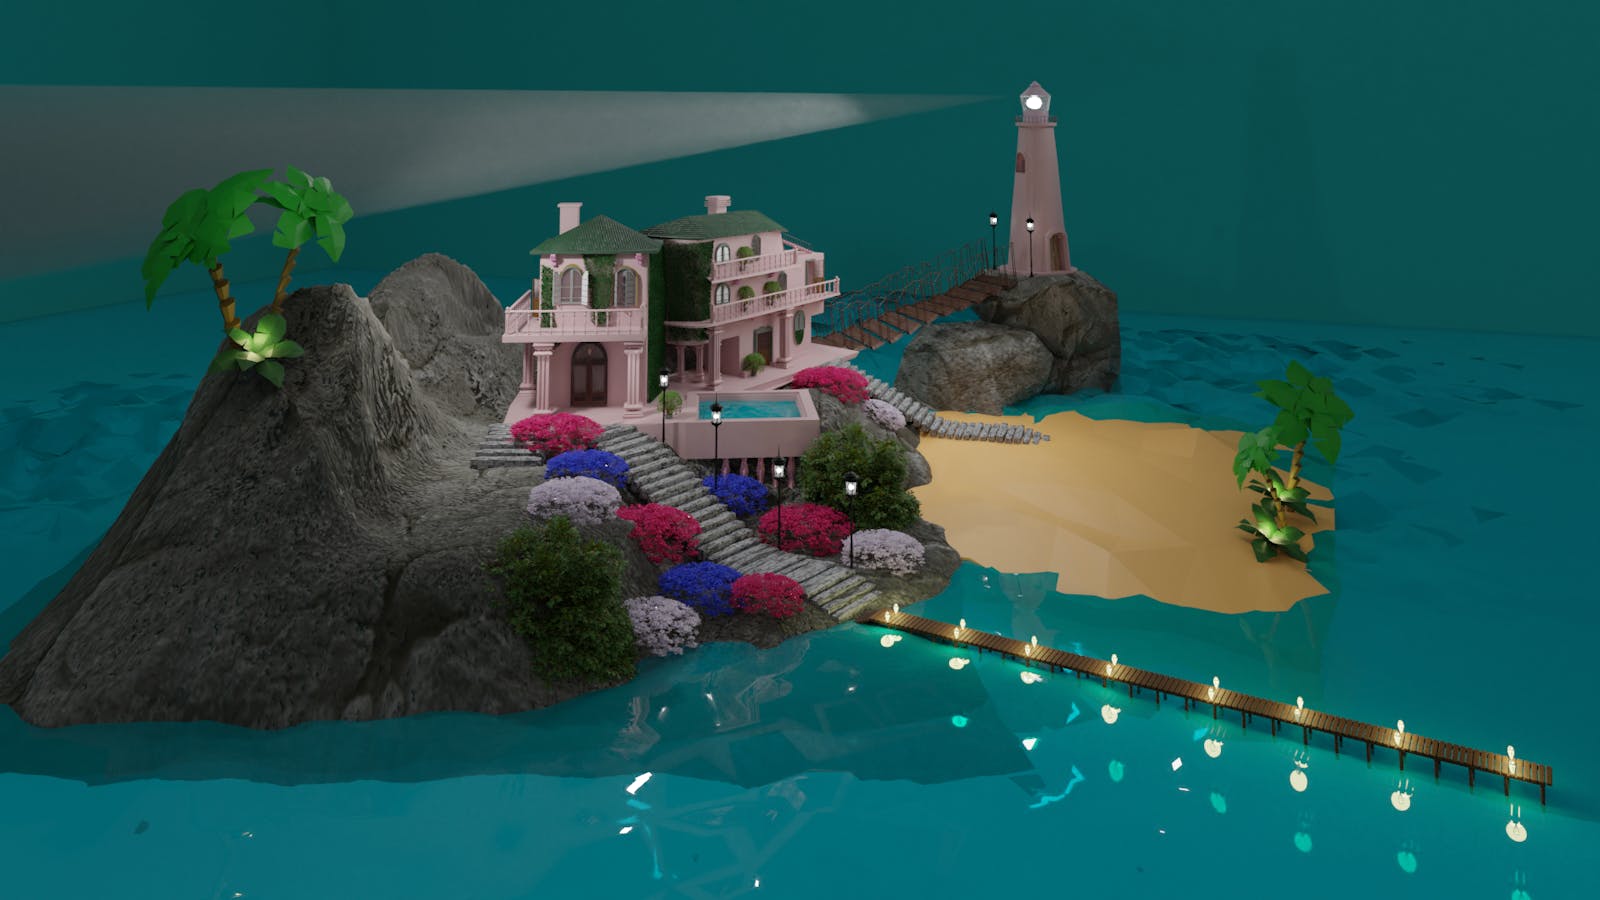 A virtual private island based in the Sandbox metaverse's Fantasy Islands real estate development. Photo by Republic Realm.